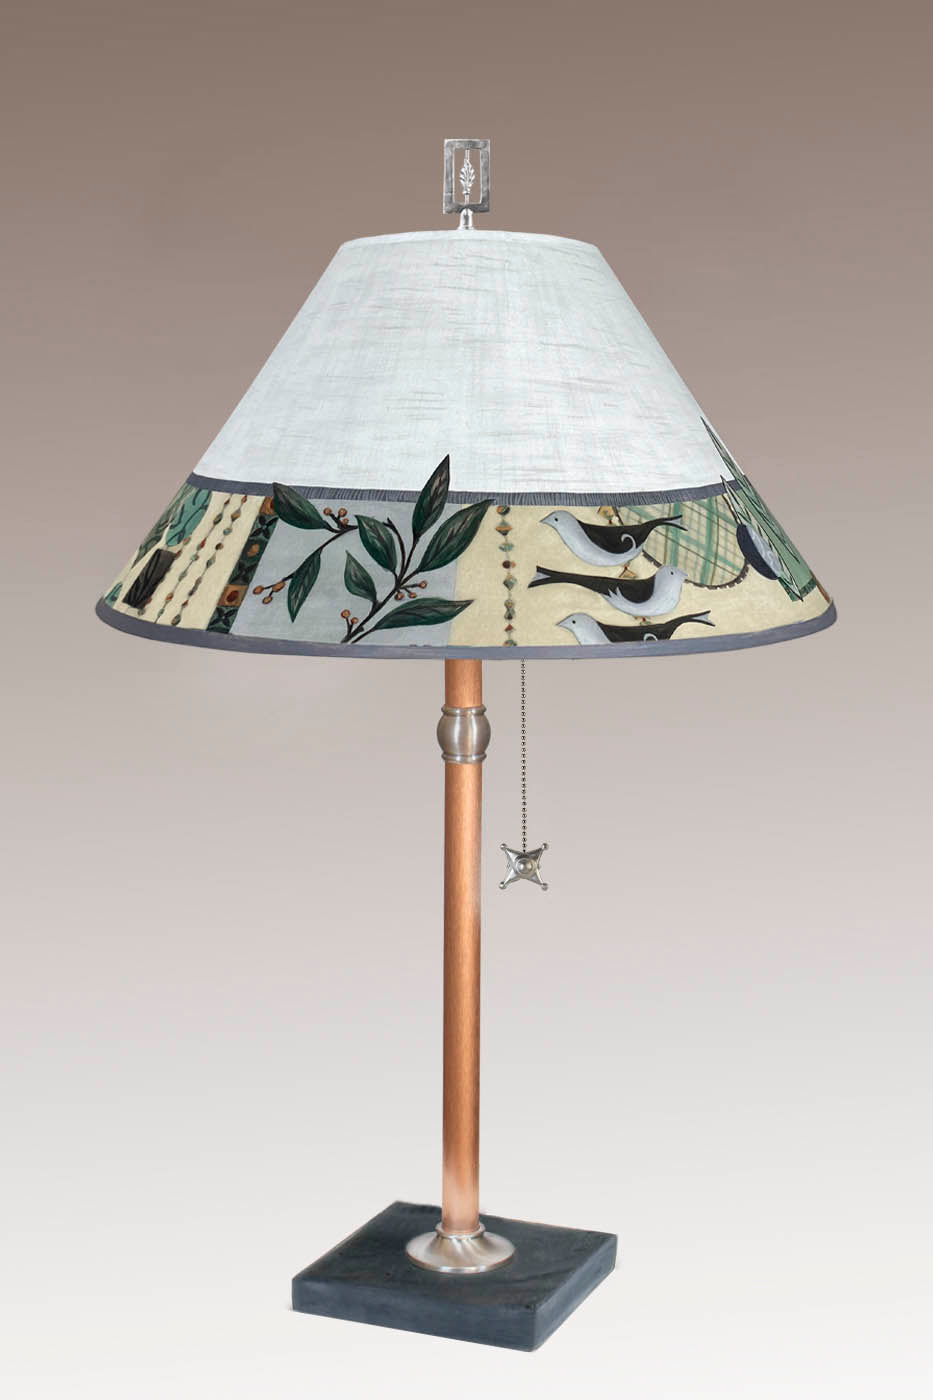 Janna Ugone & Co Table Lamp Copper Table Lamp with Large Conical Shade in New Capri Opal